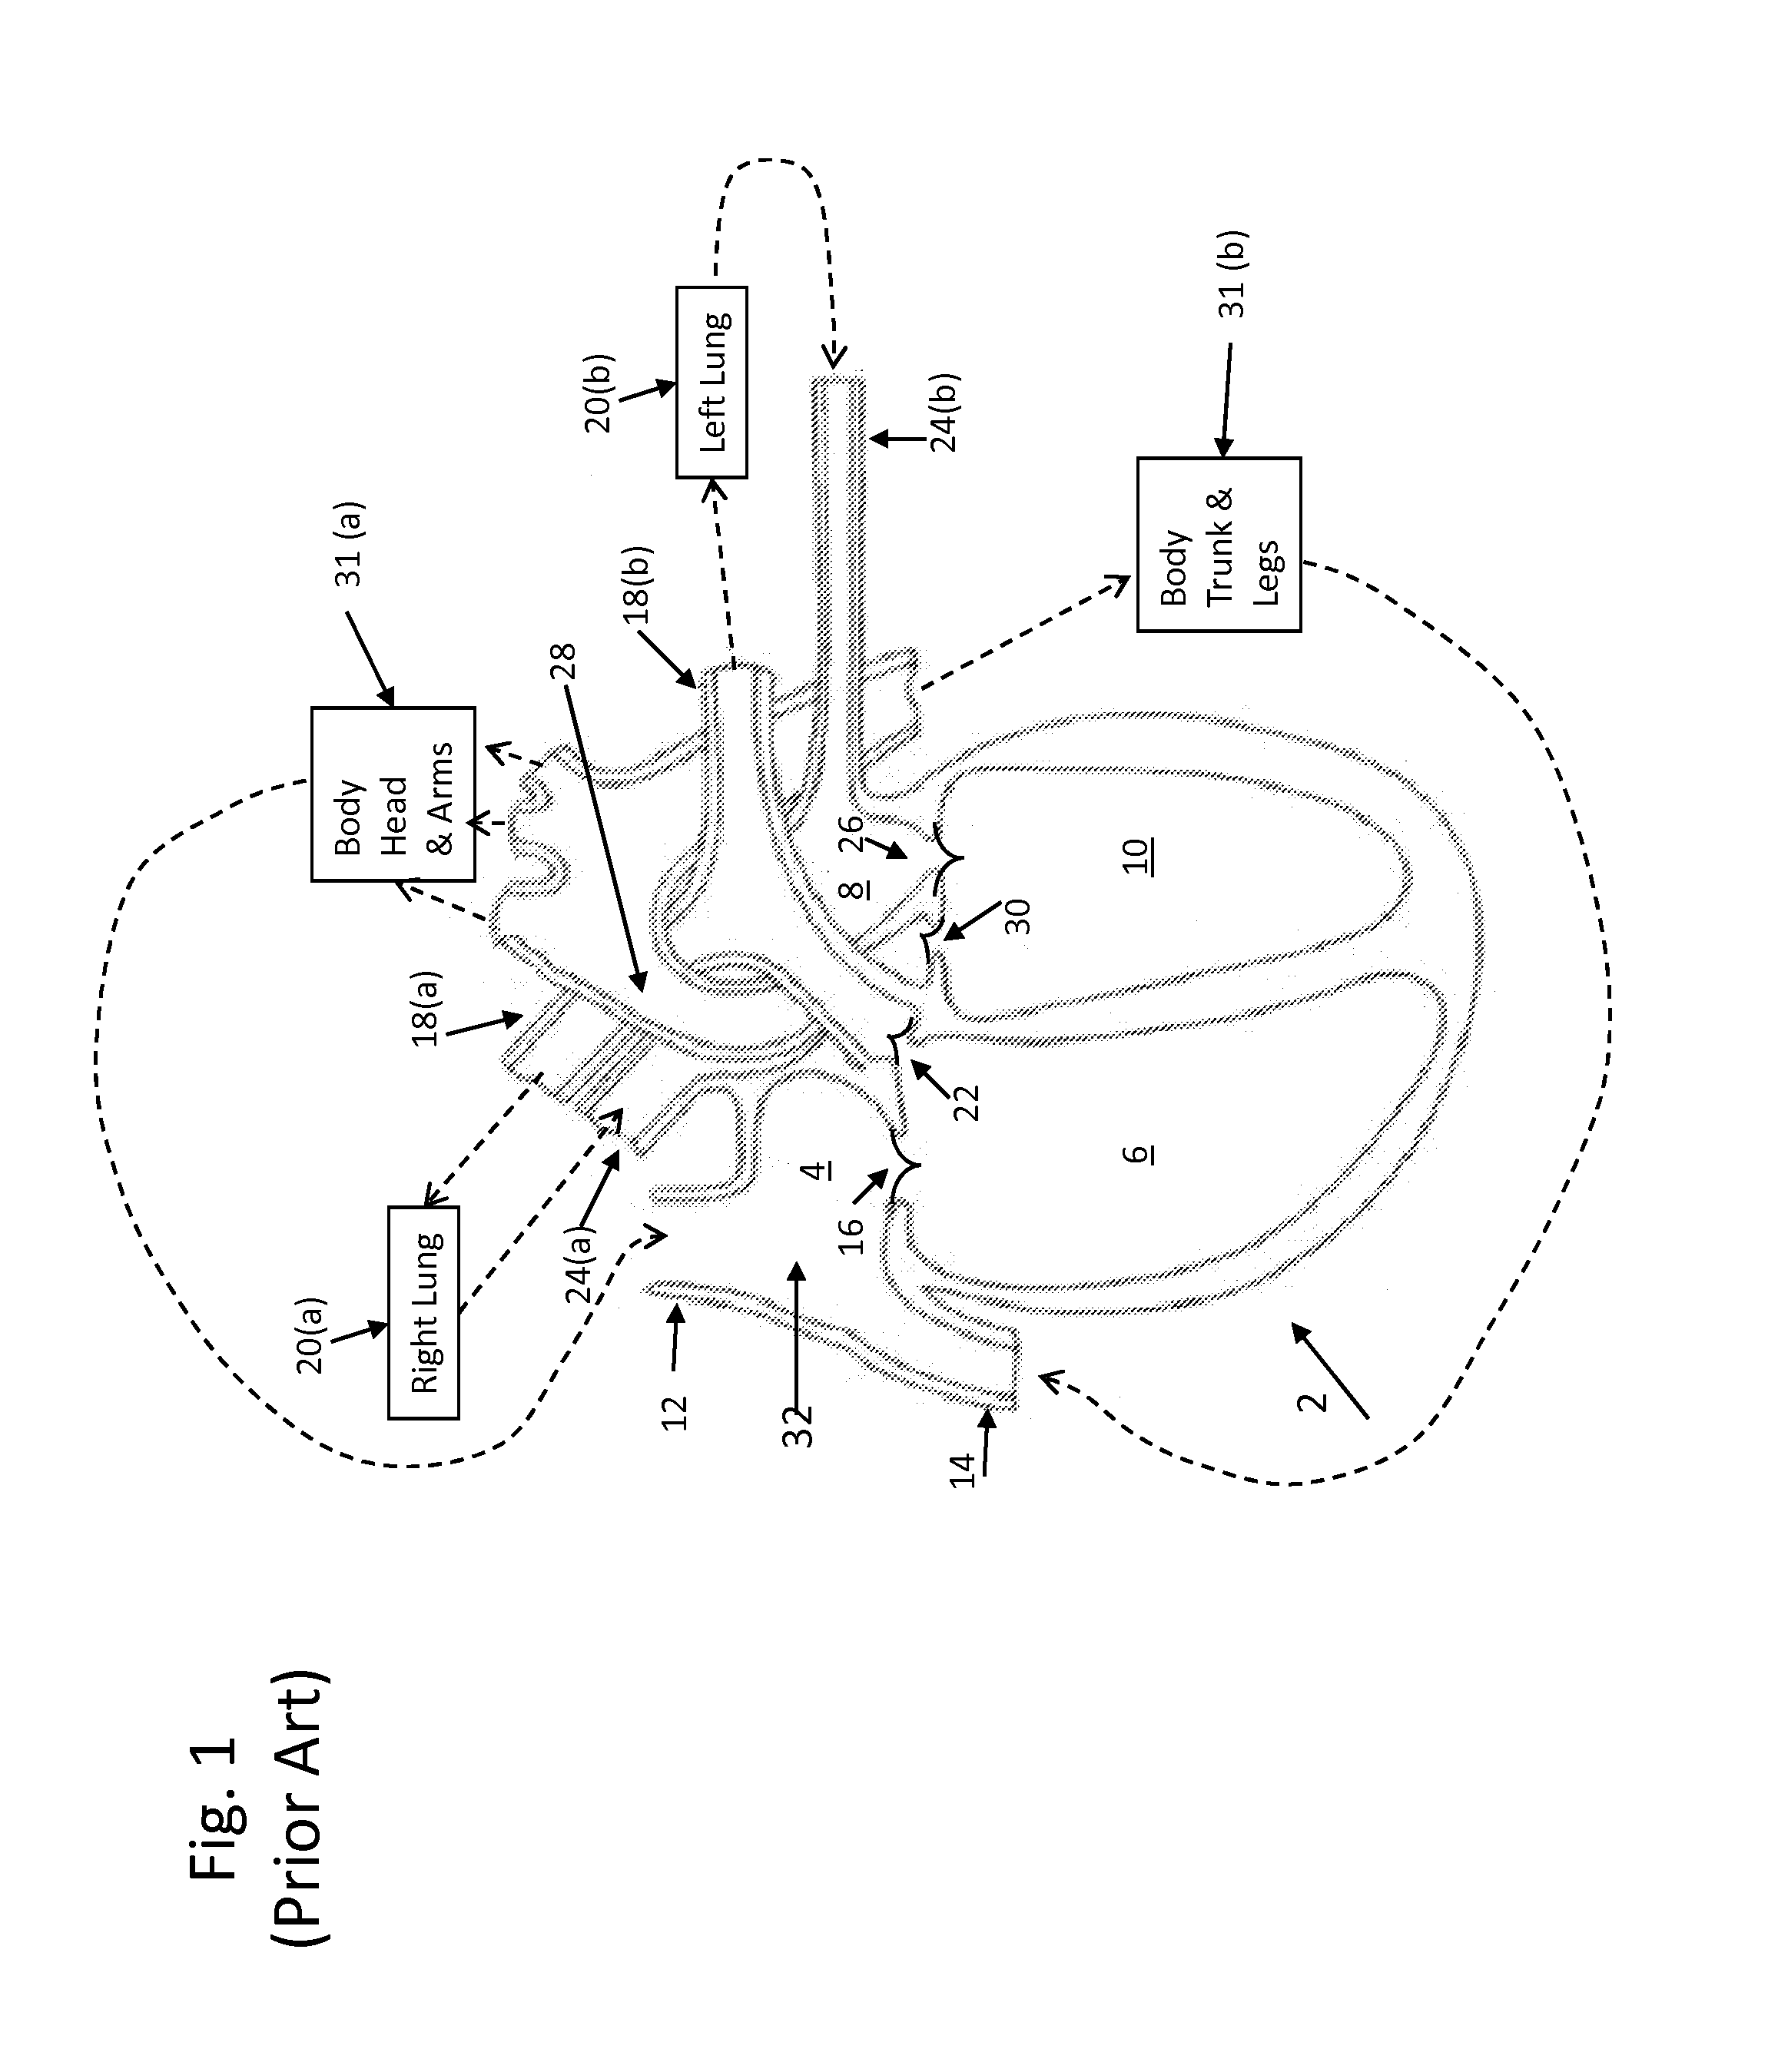 System and Method For Monitoring Cardiac Blood Flow Balance Between The Right and Left Heart Chambers